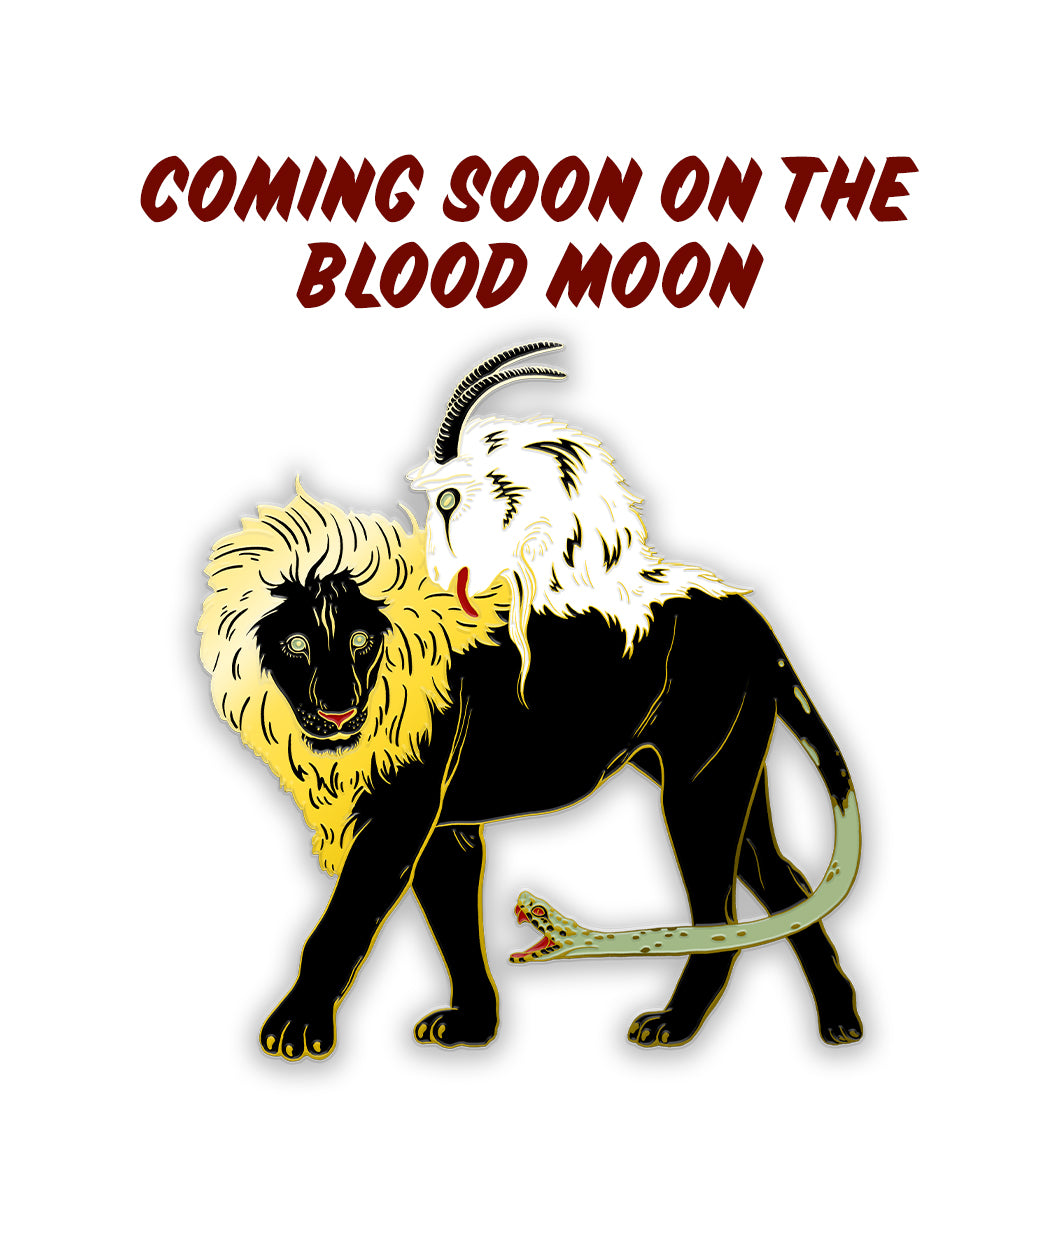 A black lion with a gold mane and gold highlights on lion. Tail is a green snake and on the back is a white goat head with black horns and a red tongue hanging out - from Monstrum 